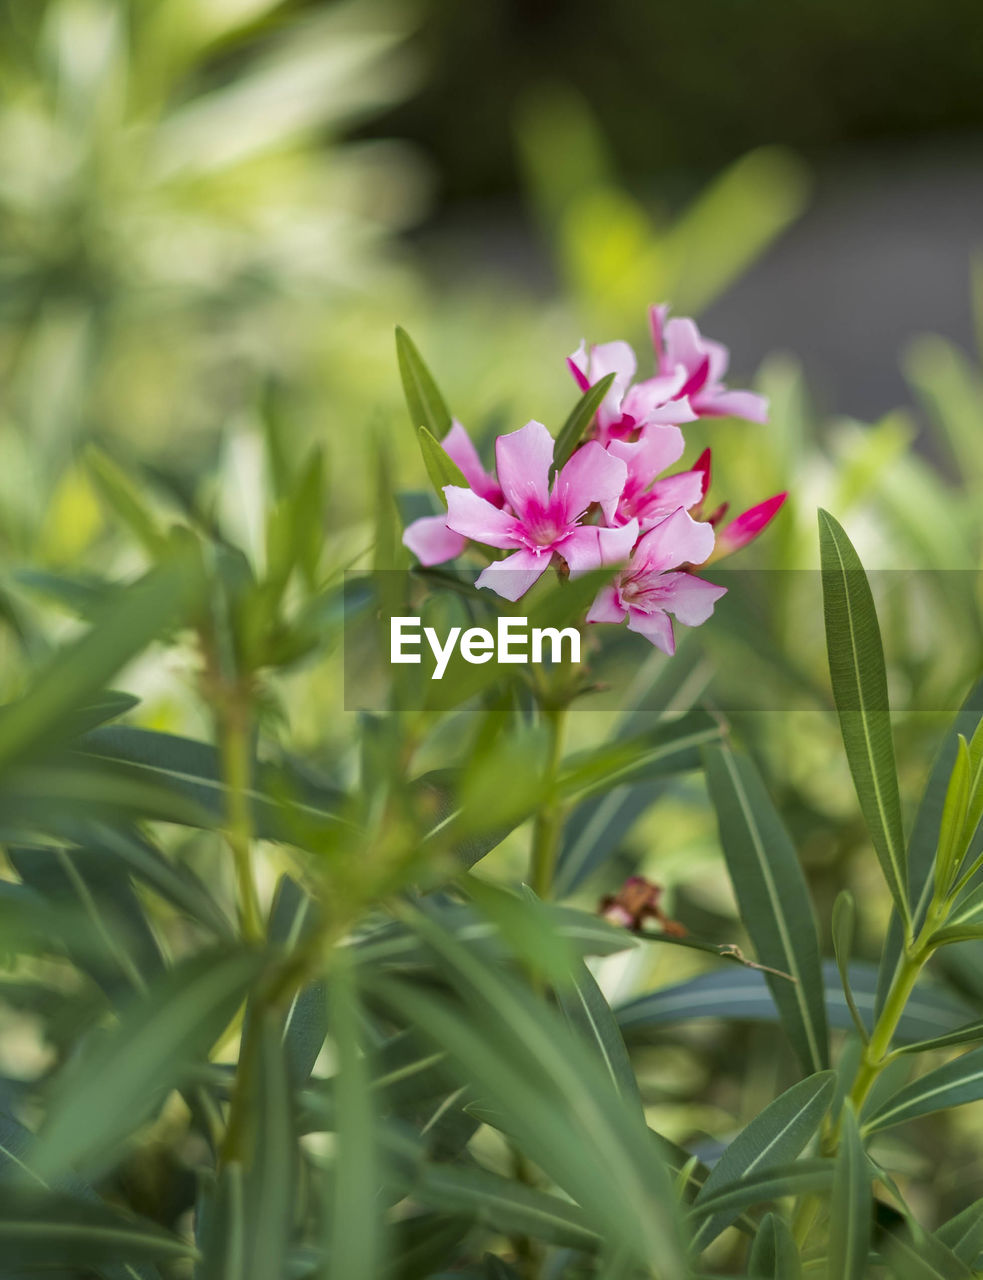 plant, flower, flowering plant, beauty in nature, freshness, pink, nature, leaf, plant part, close-up, grass, growth, wildflower, no people, petal, fragility, flower head, outdoors, green, environment, selective focus, summer, inflorescence, food and drink, botany, blossom, macro photography, food, flowerbed